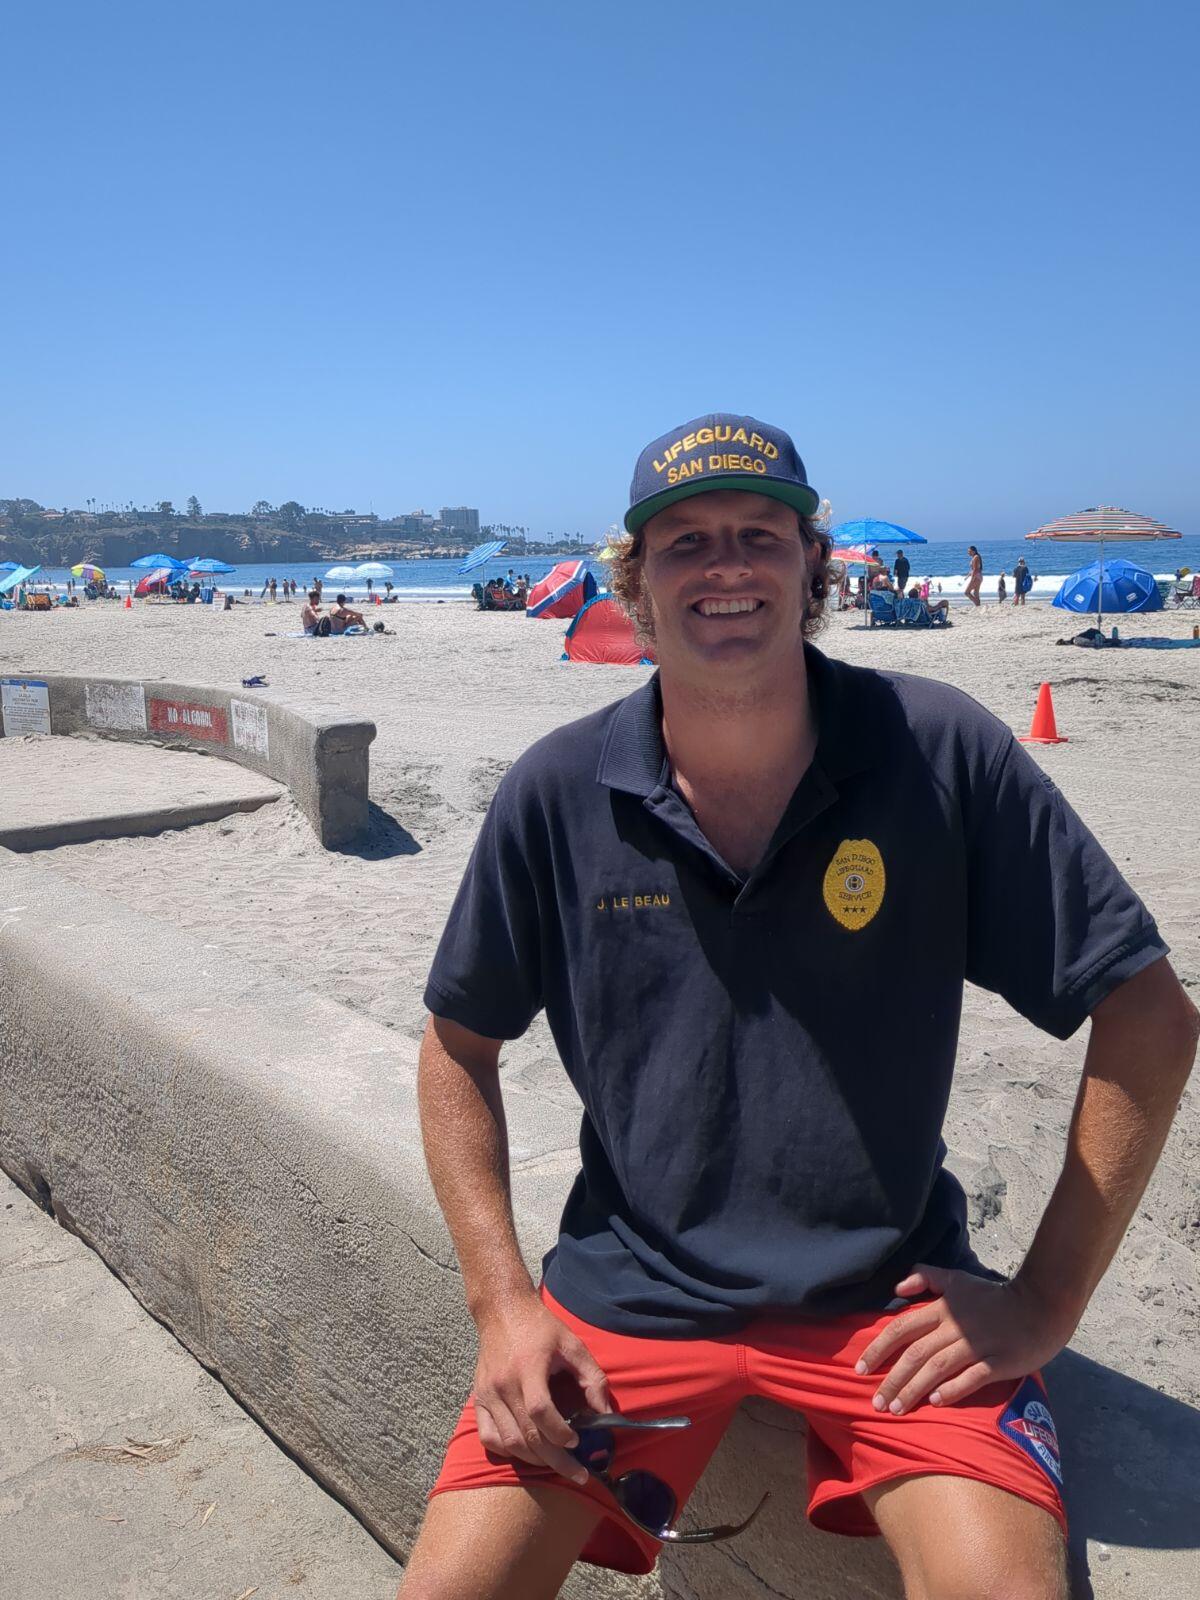 La Jolla resident James (Jimmy) Le Beau was recognized as Lifeguard II of the Year by the San Diego Lifesaving Association.